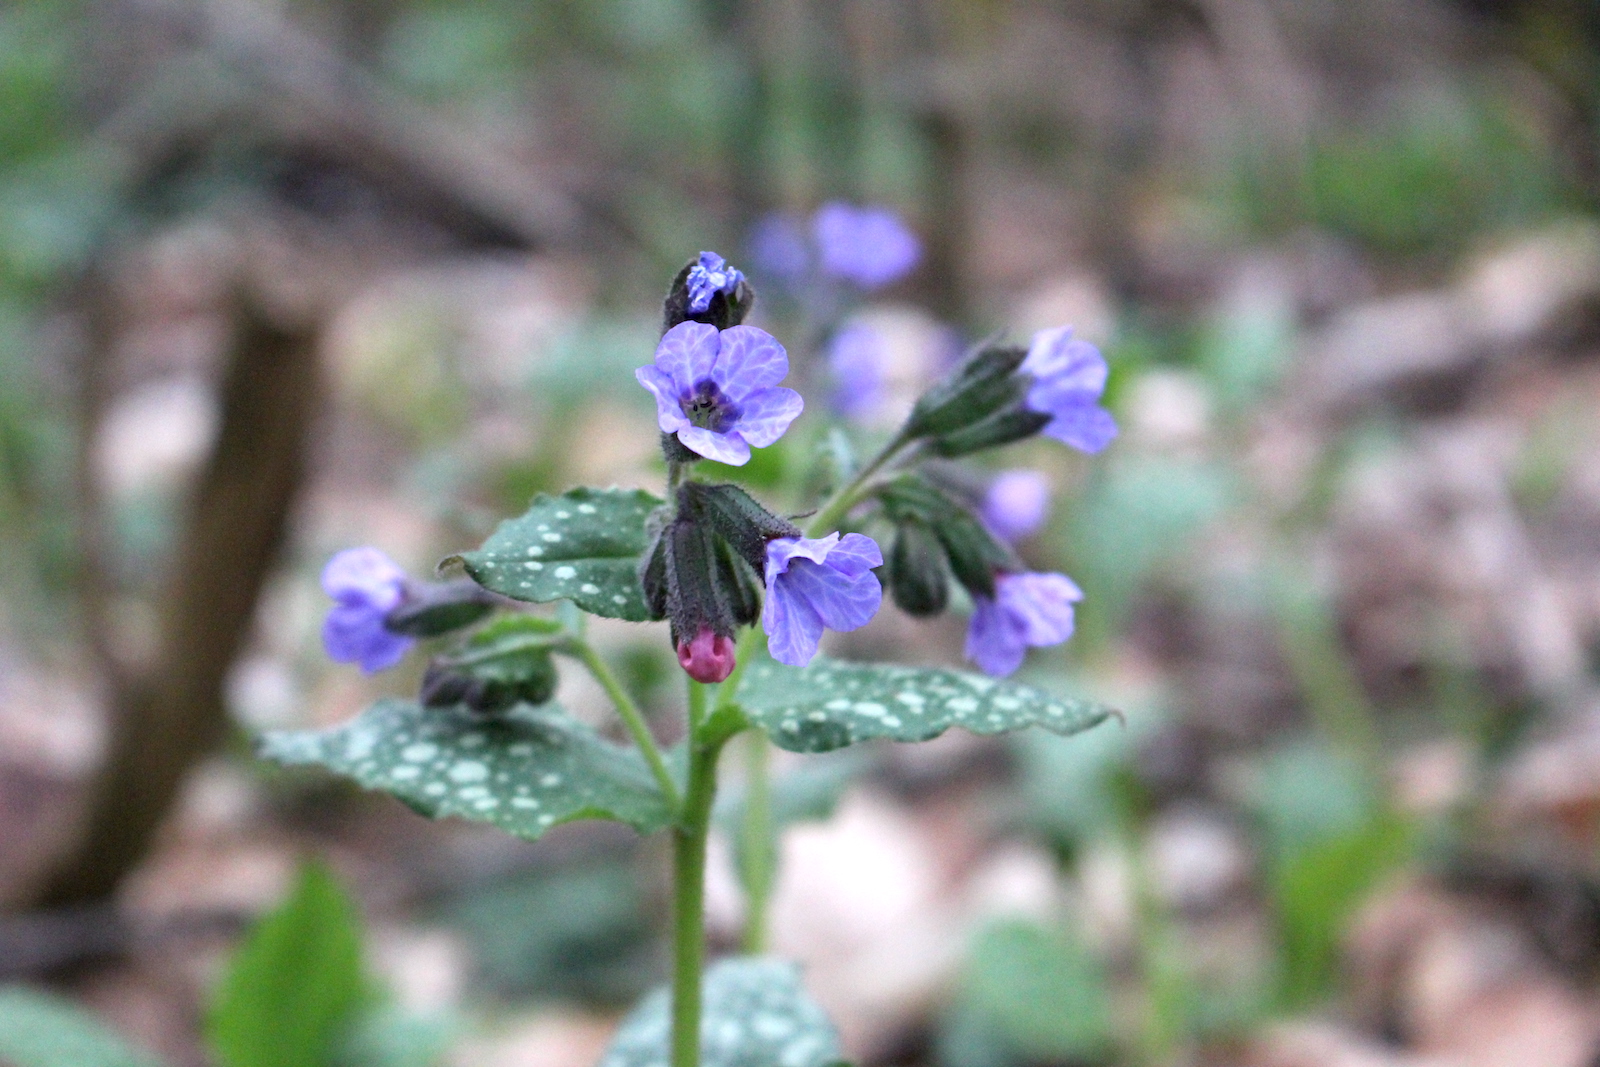 Lungwort Flowers